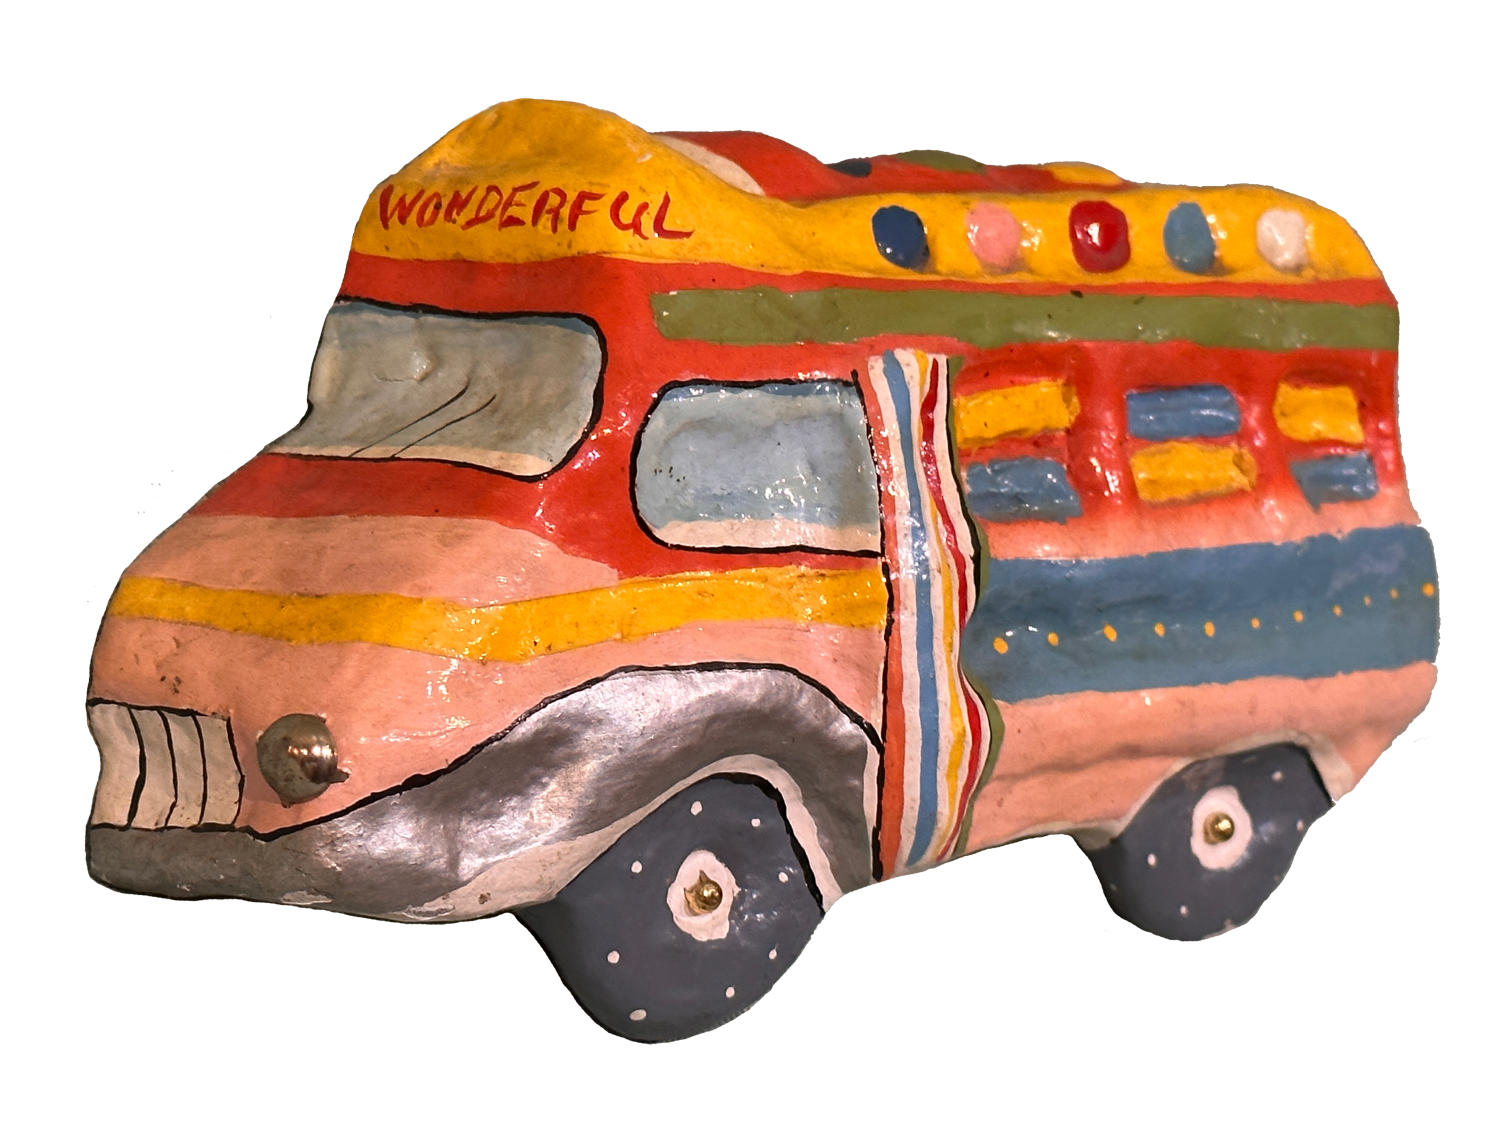 a hand painted folk bus with wonderful as it's destination